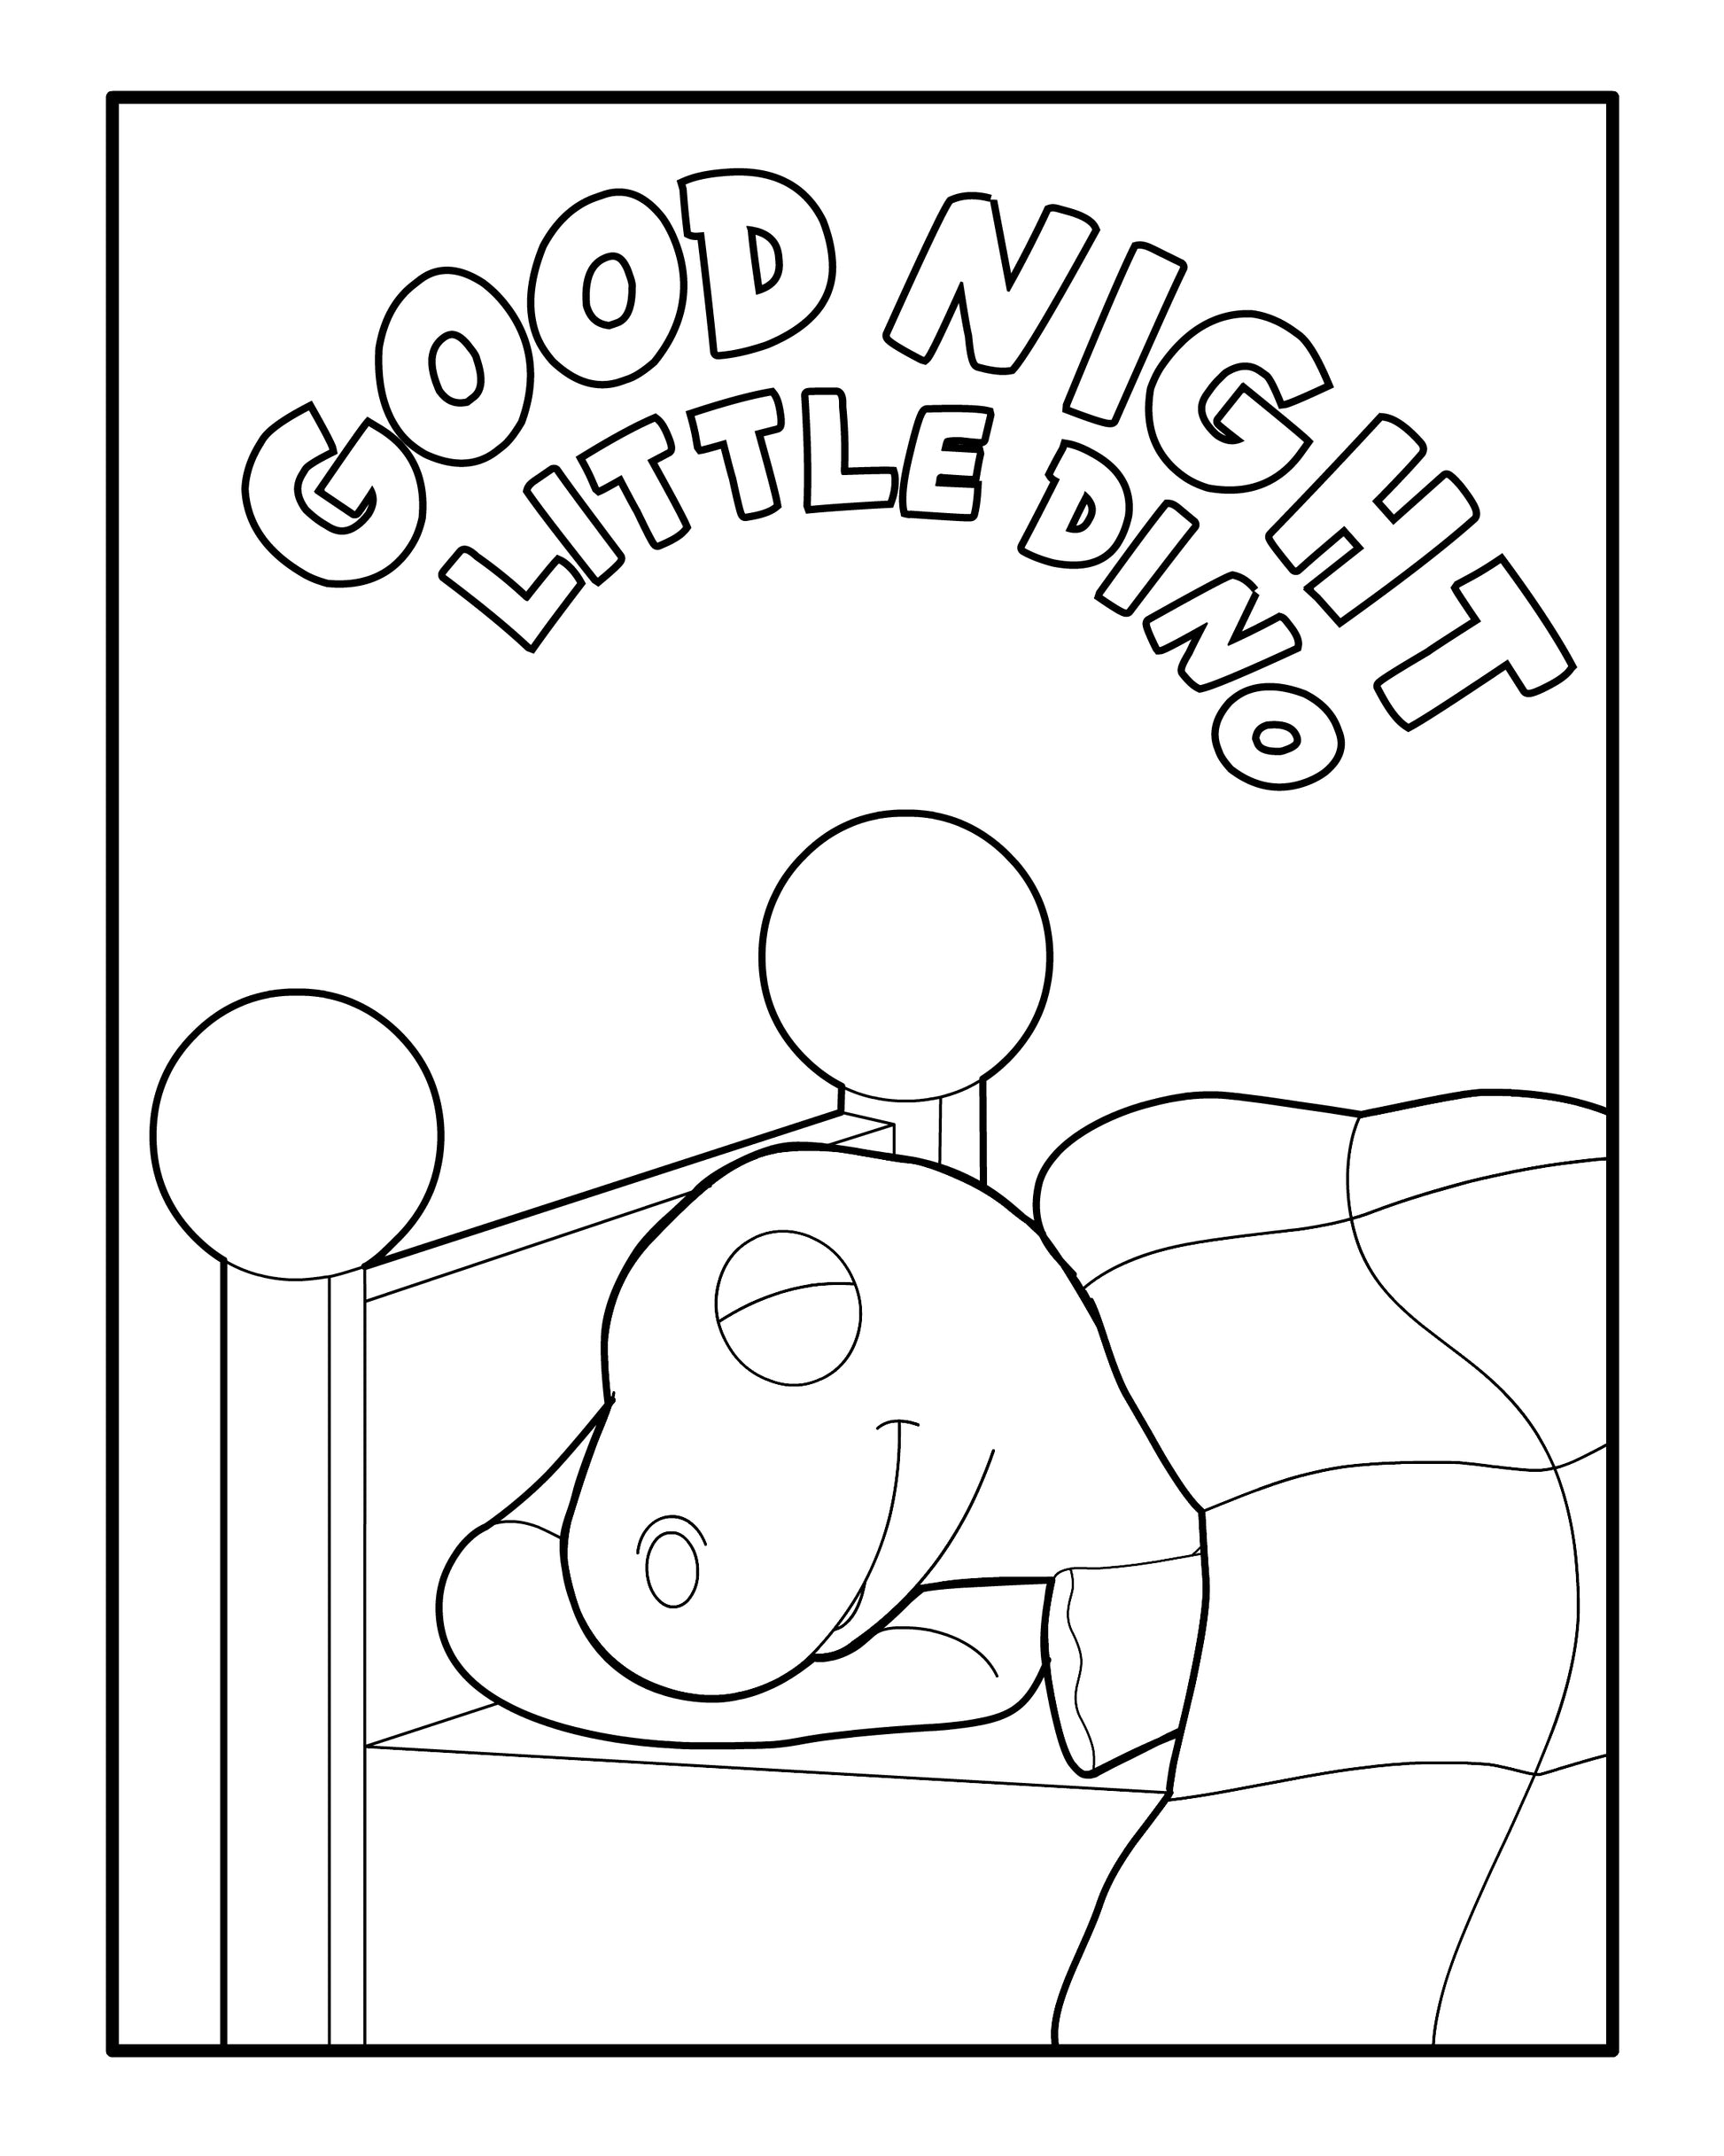 A black and white coloring page featuring a peaceful scene with the text 'GOOD NIGHT LITTLE DINO' arched above a young, smiling dinosaur fast asleep in bed, with its head resting on a pillow and a cozy blanket draped over its body, creating a calming bedtime atmosphere.